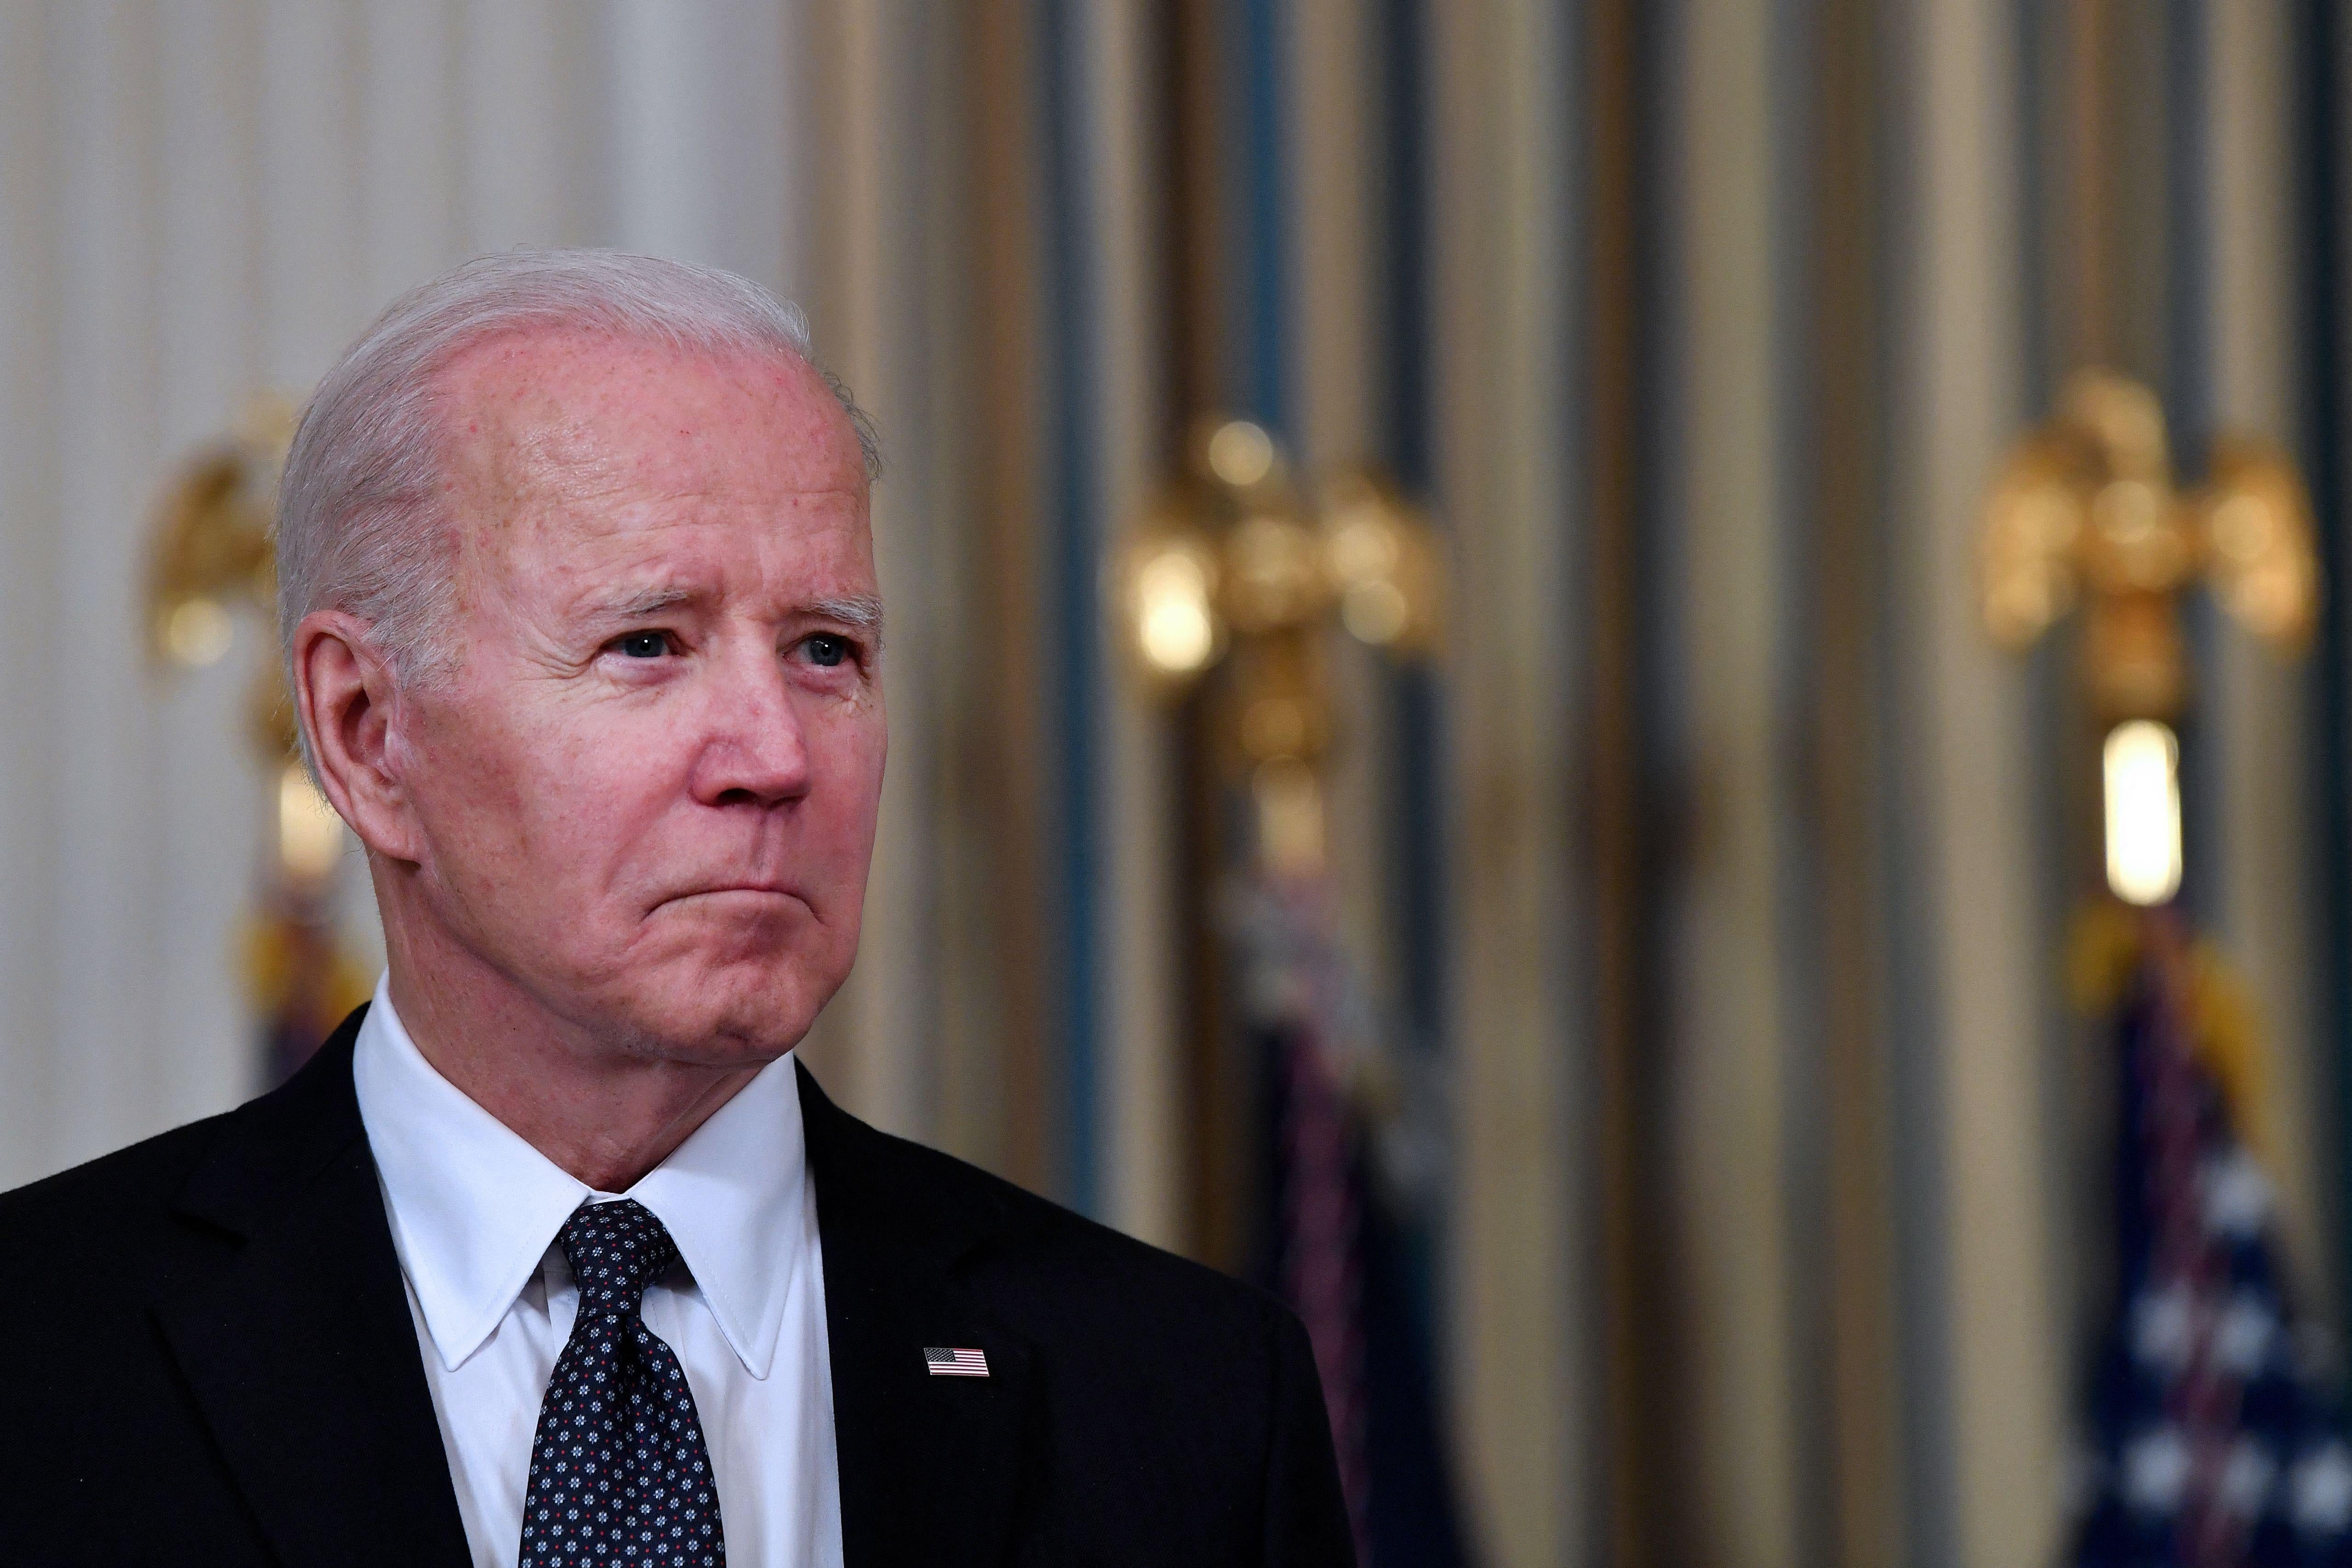 Biden looking sheepish in the state dining room of the White House